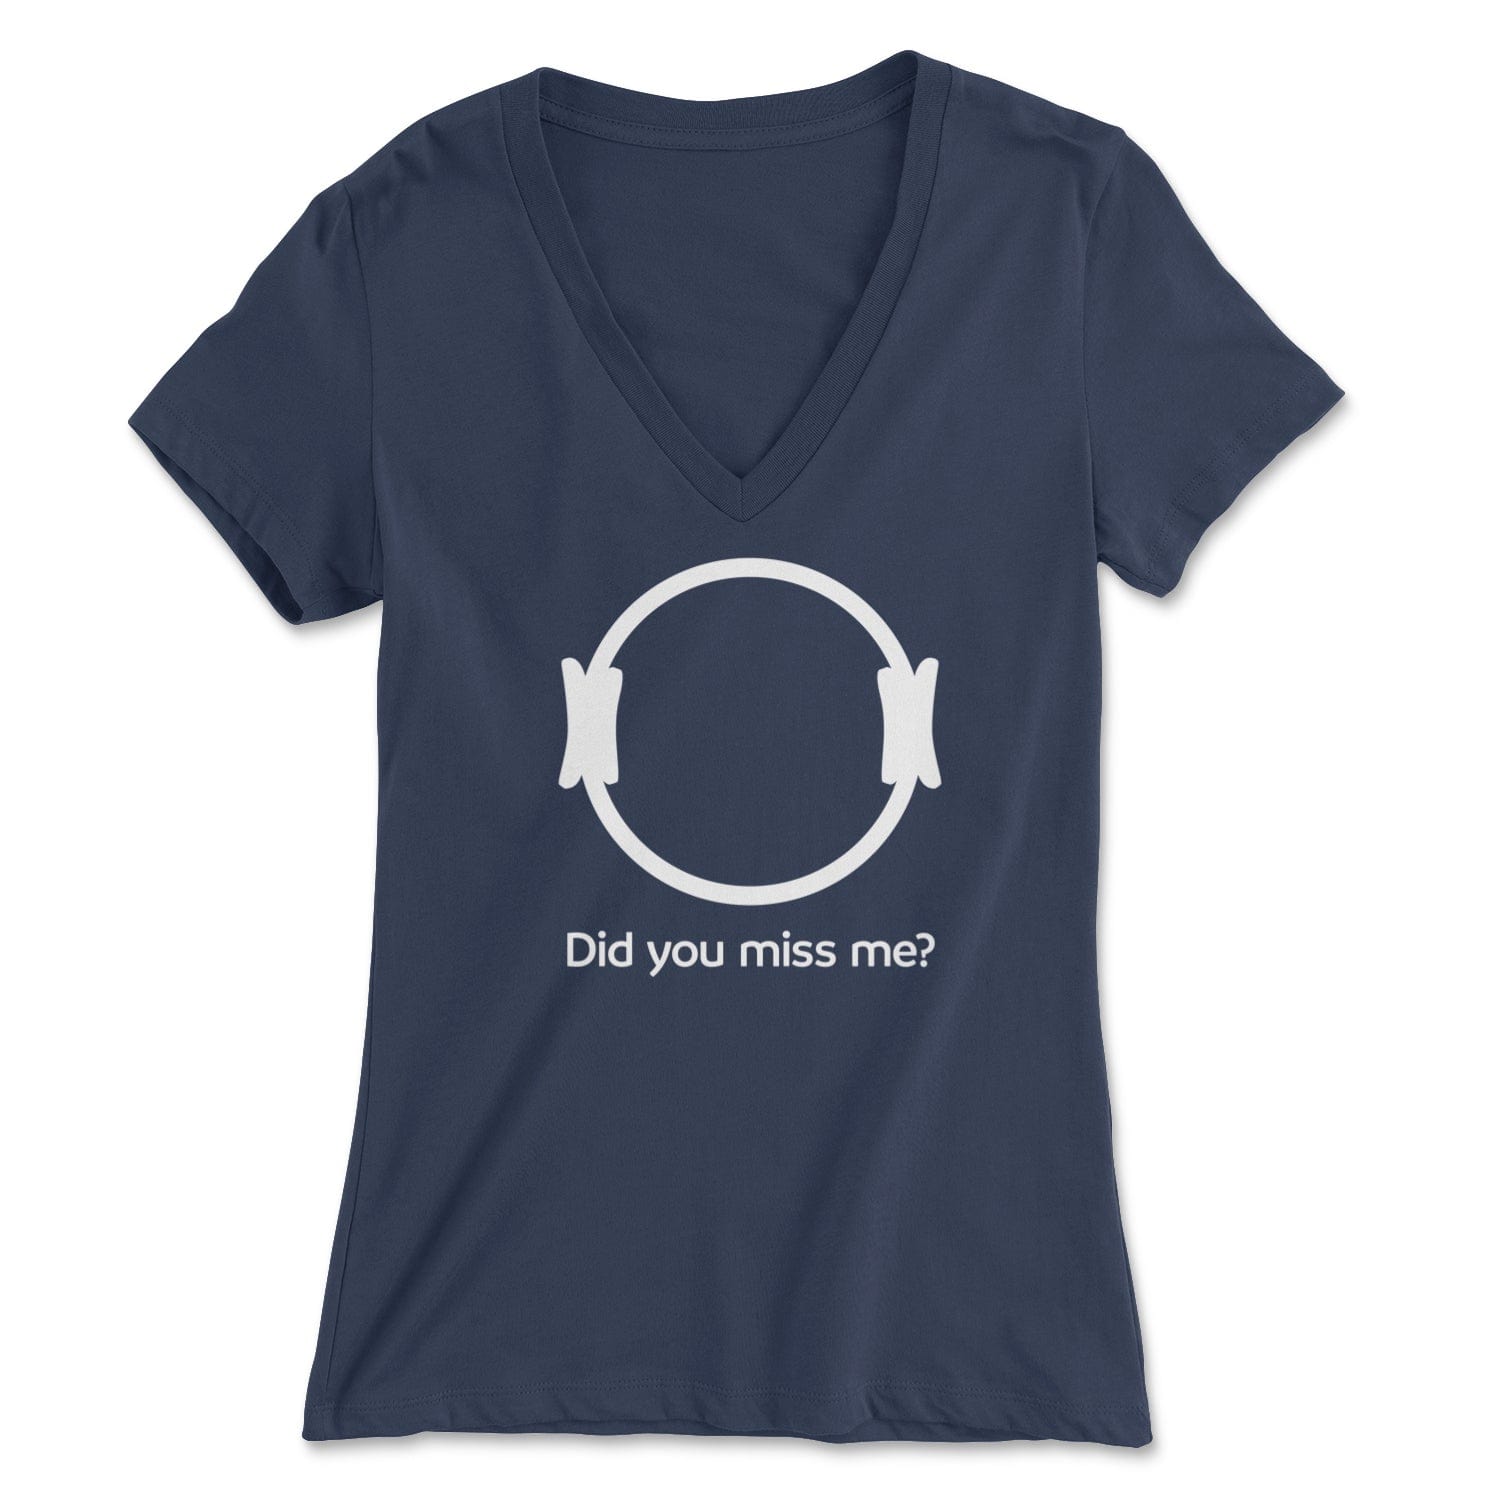 "Did You Miss Me?" Pilates Circle - Women's V-Neck Tee Skyba Print Material